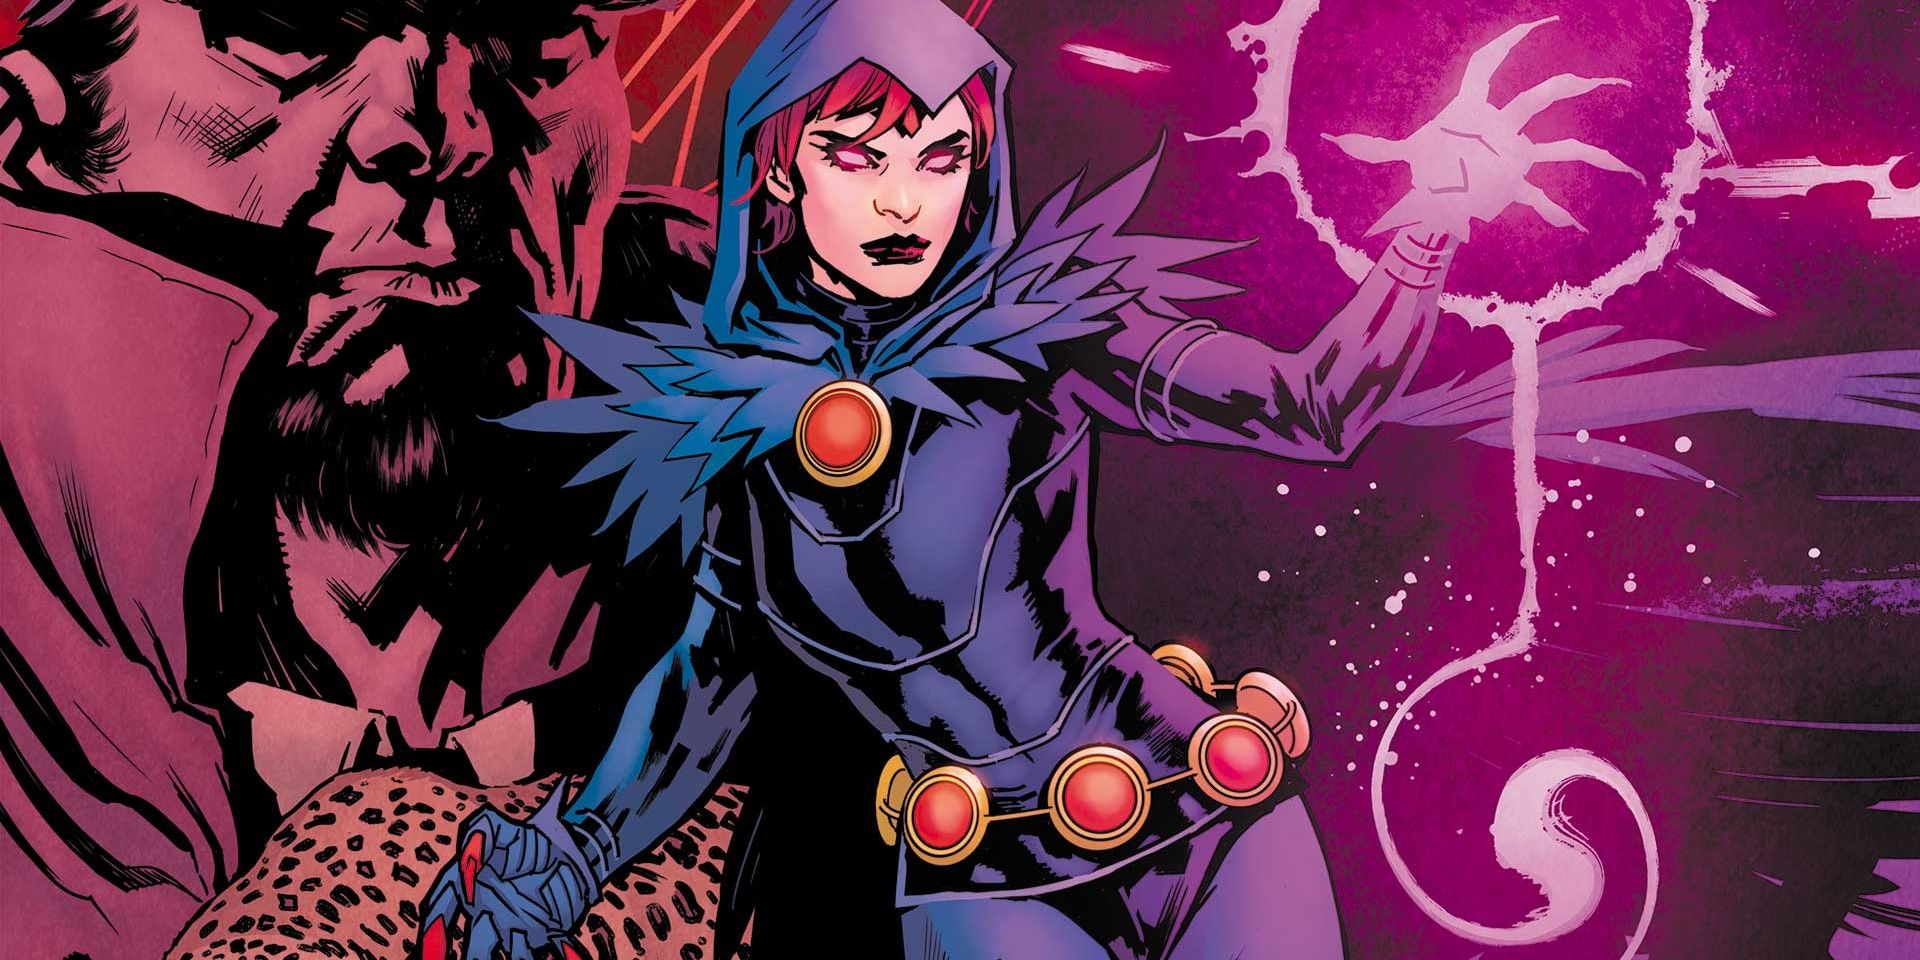 Raven from DC Comics using her magical abilities